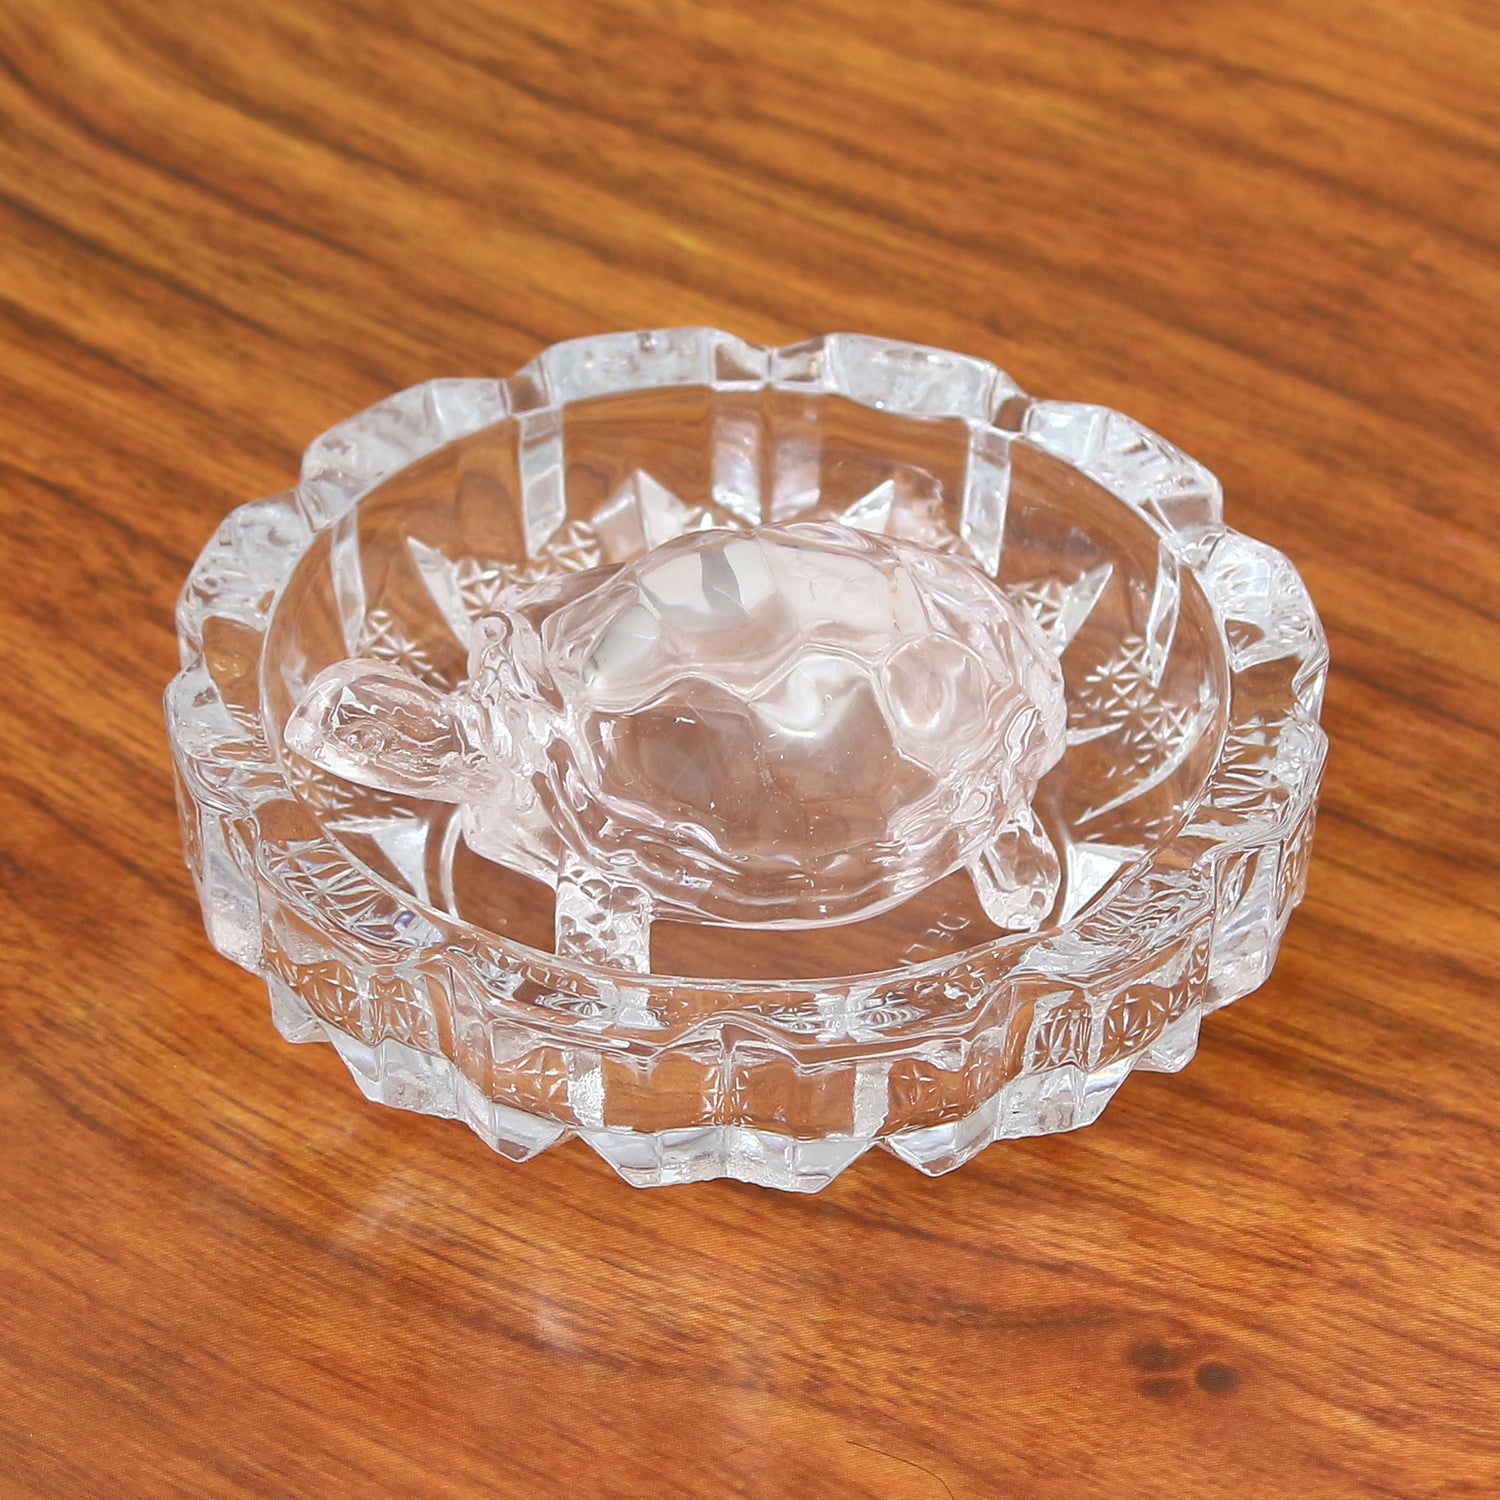 Decorative Feng-Shui White Crystal tortoise statue with Plate for Office Desks and Home